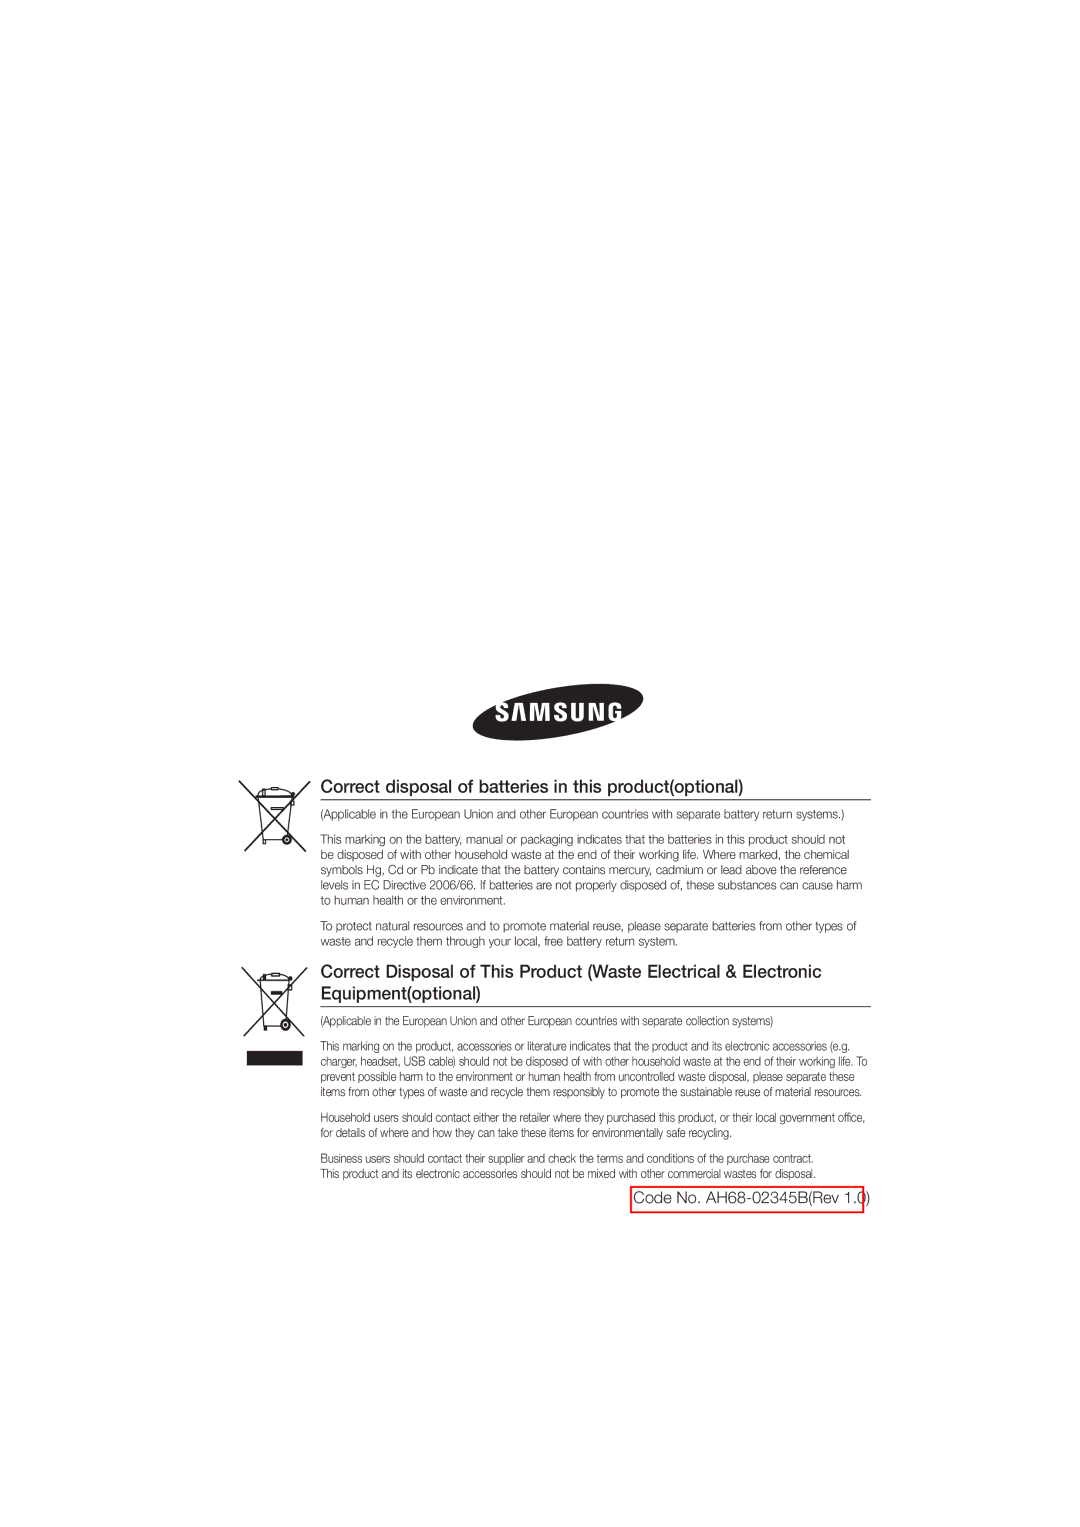 Samsung MM-D470D/XE, MM-D470D/XN manual Correct disposal of batteries in this productoptional, Code No. AH68-02345BRev 